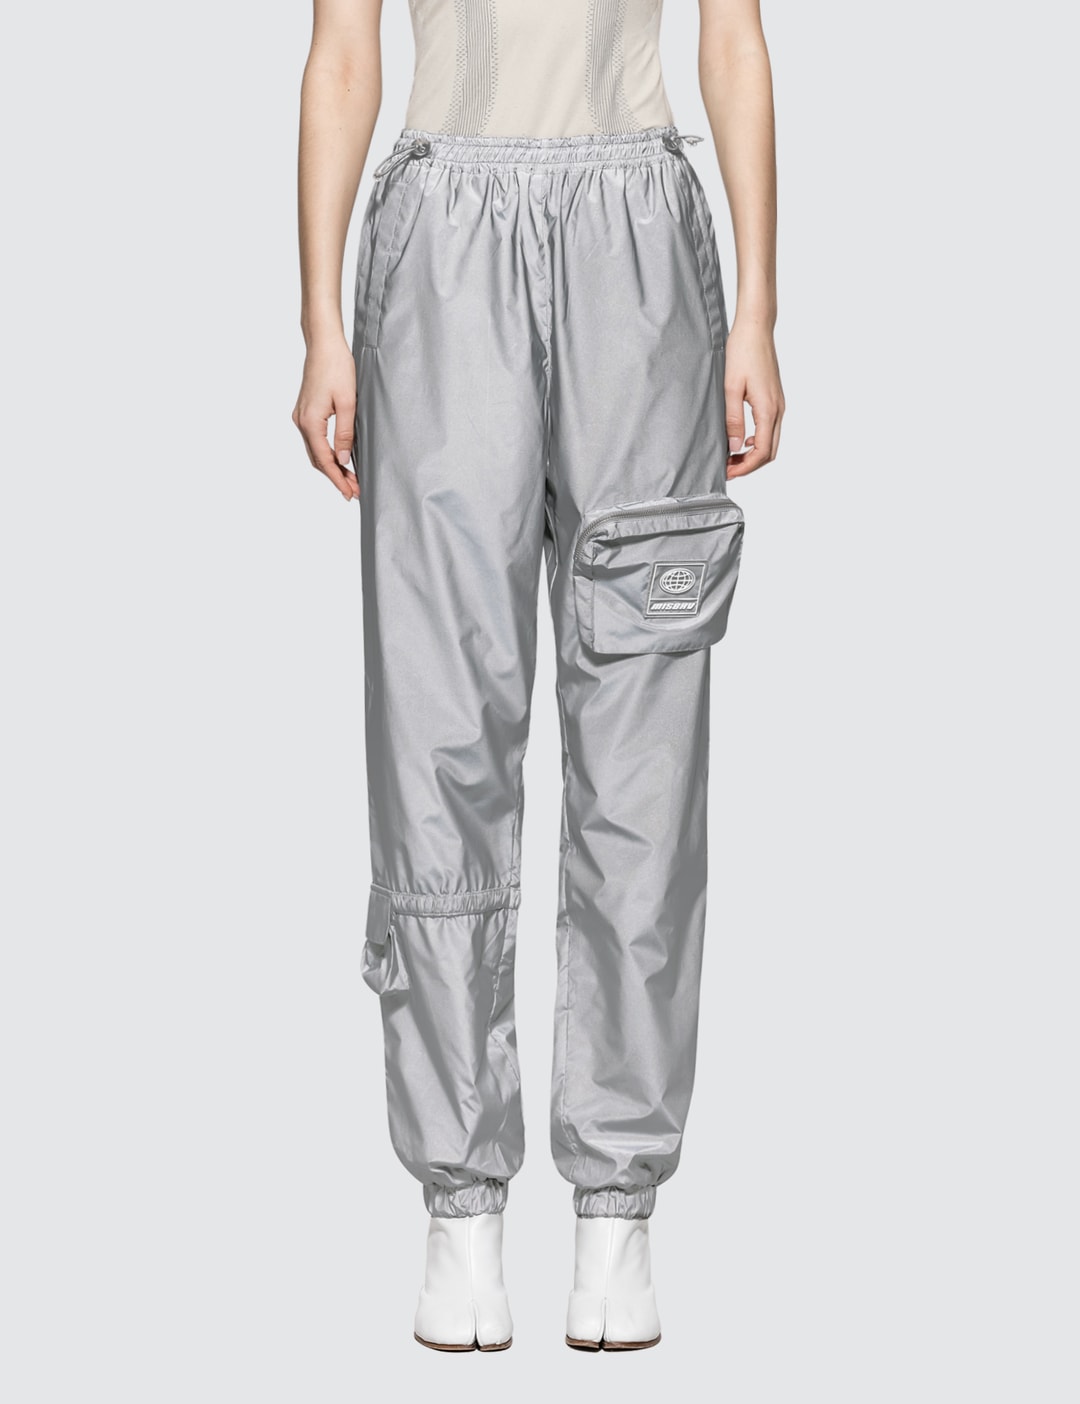 Misbhv - Utility Reflective Trousers | HBX - Globally Curated Fashion ...